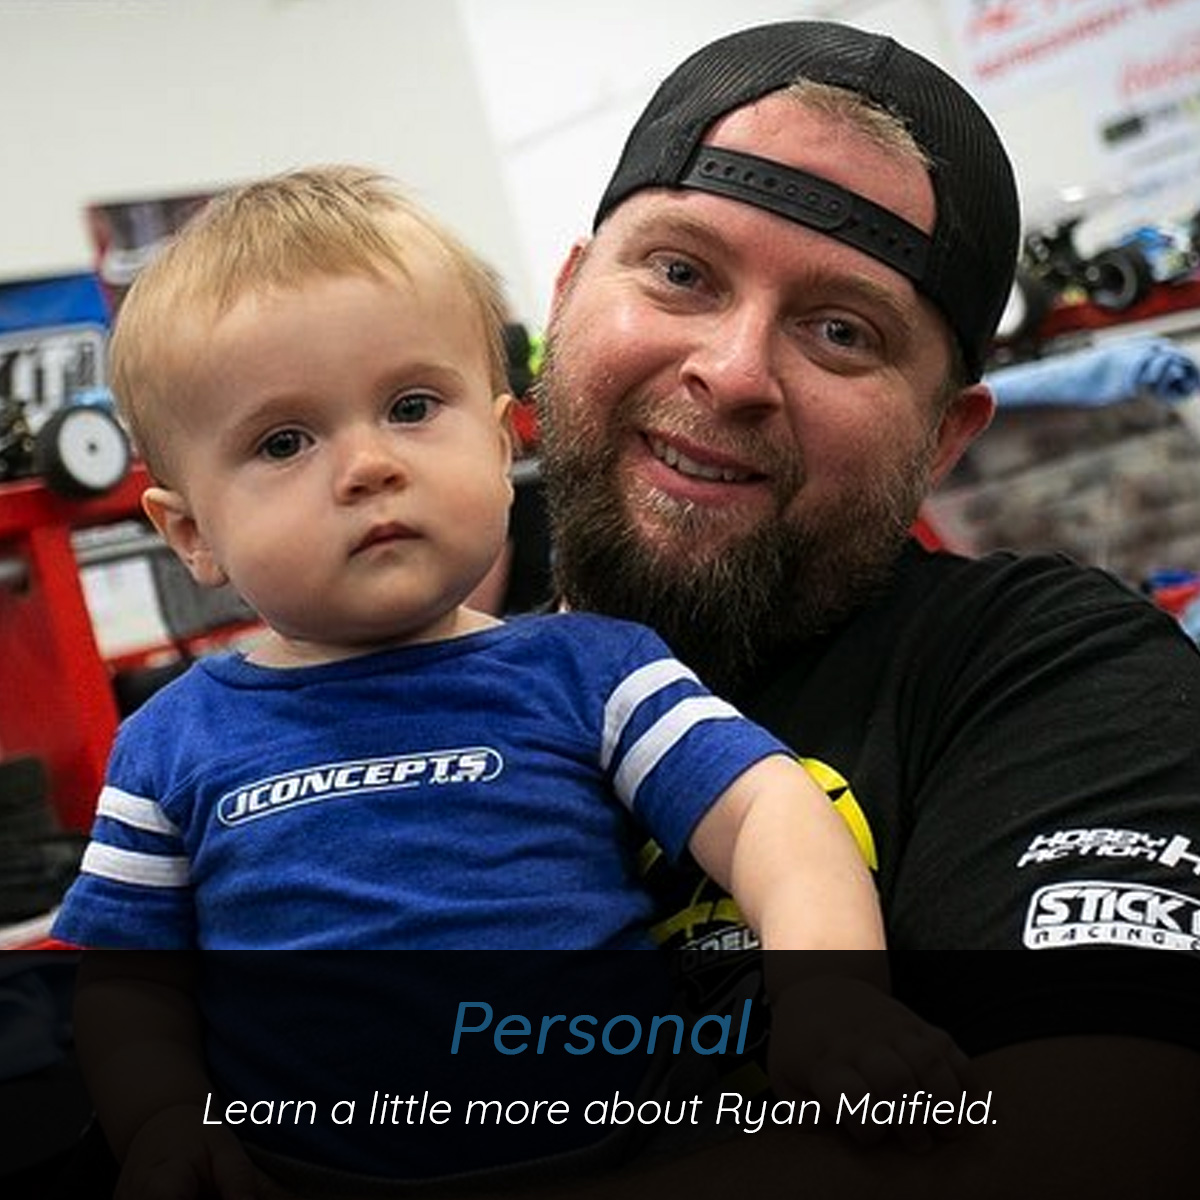 Learn a little more about Ryan Maifield